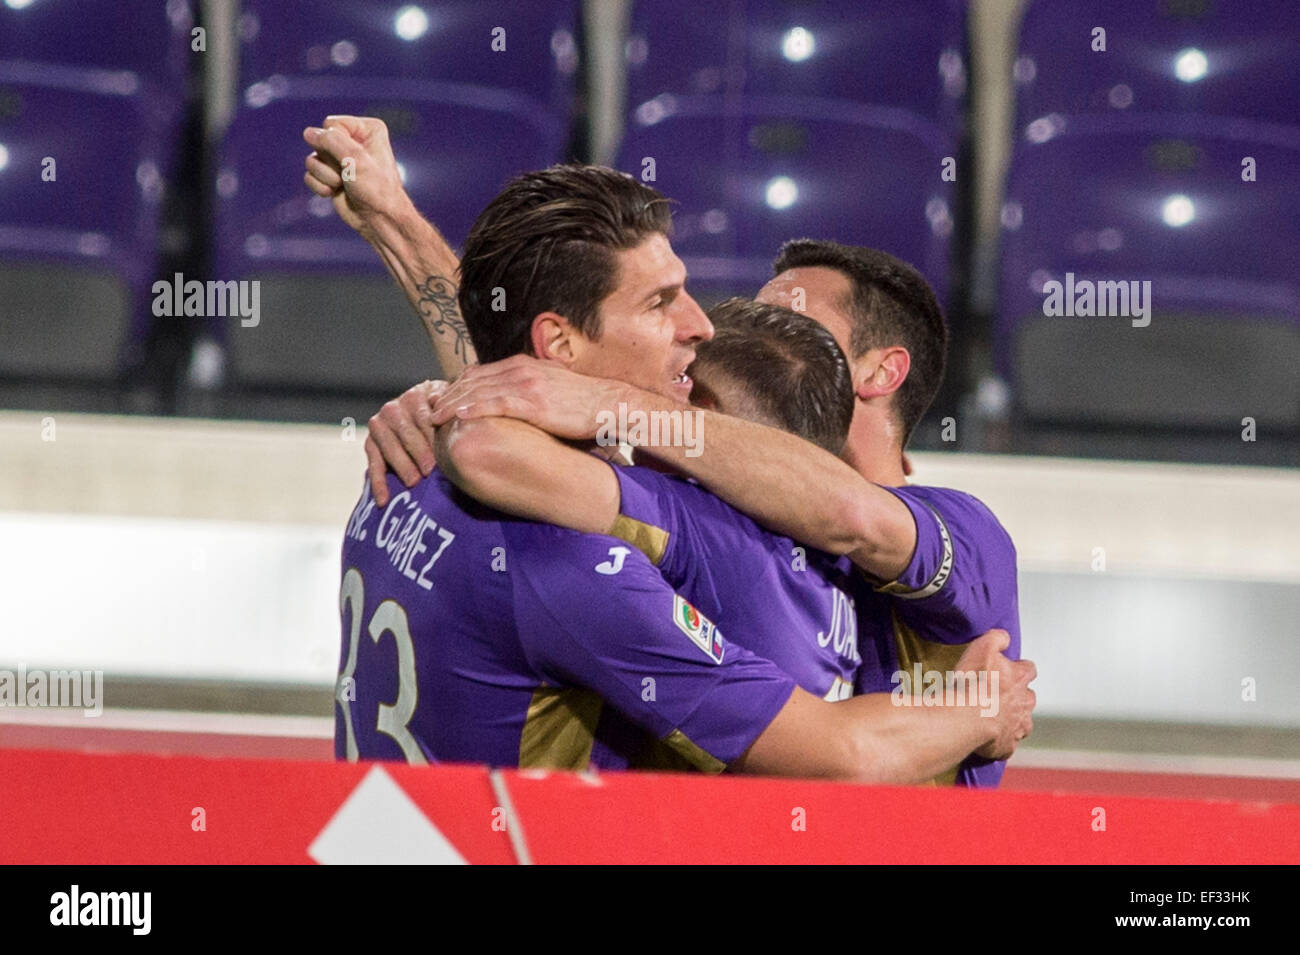 Firenze, Italy. 25th Jan, 2015. Fiorentina team group Football/Soccer : Players of Fiorentina celebrate scoring the opening goal by Mario Gomez during the Italian 'Serie A' match between ACF Fiorentina 1-1 AS Roma at Stadio Artemio Franchi in Firenze, Italy . © Maurizio Borsari/AFLO/Alamy Live News Stock Photo